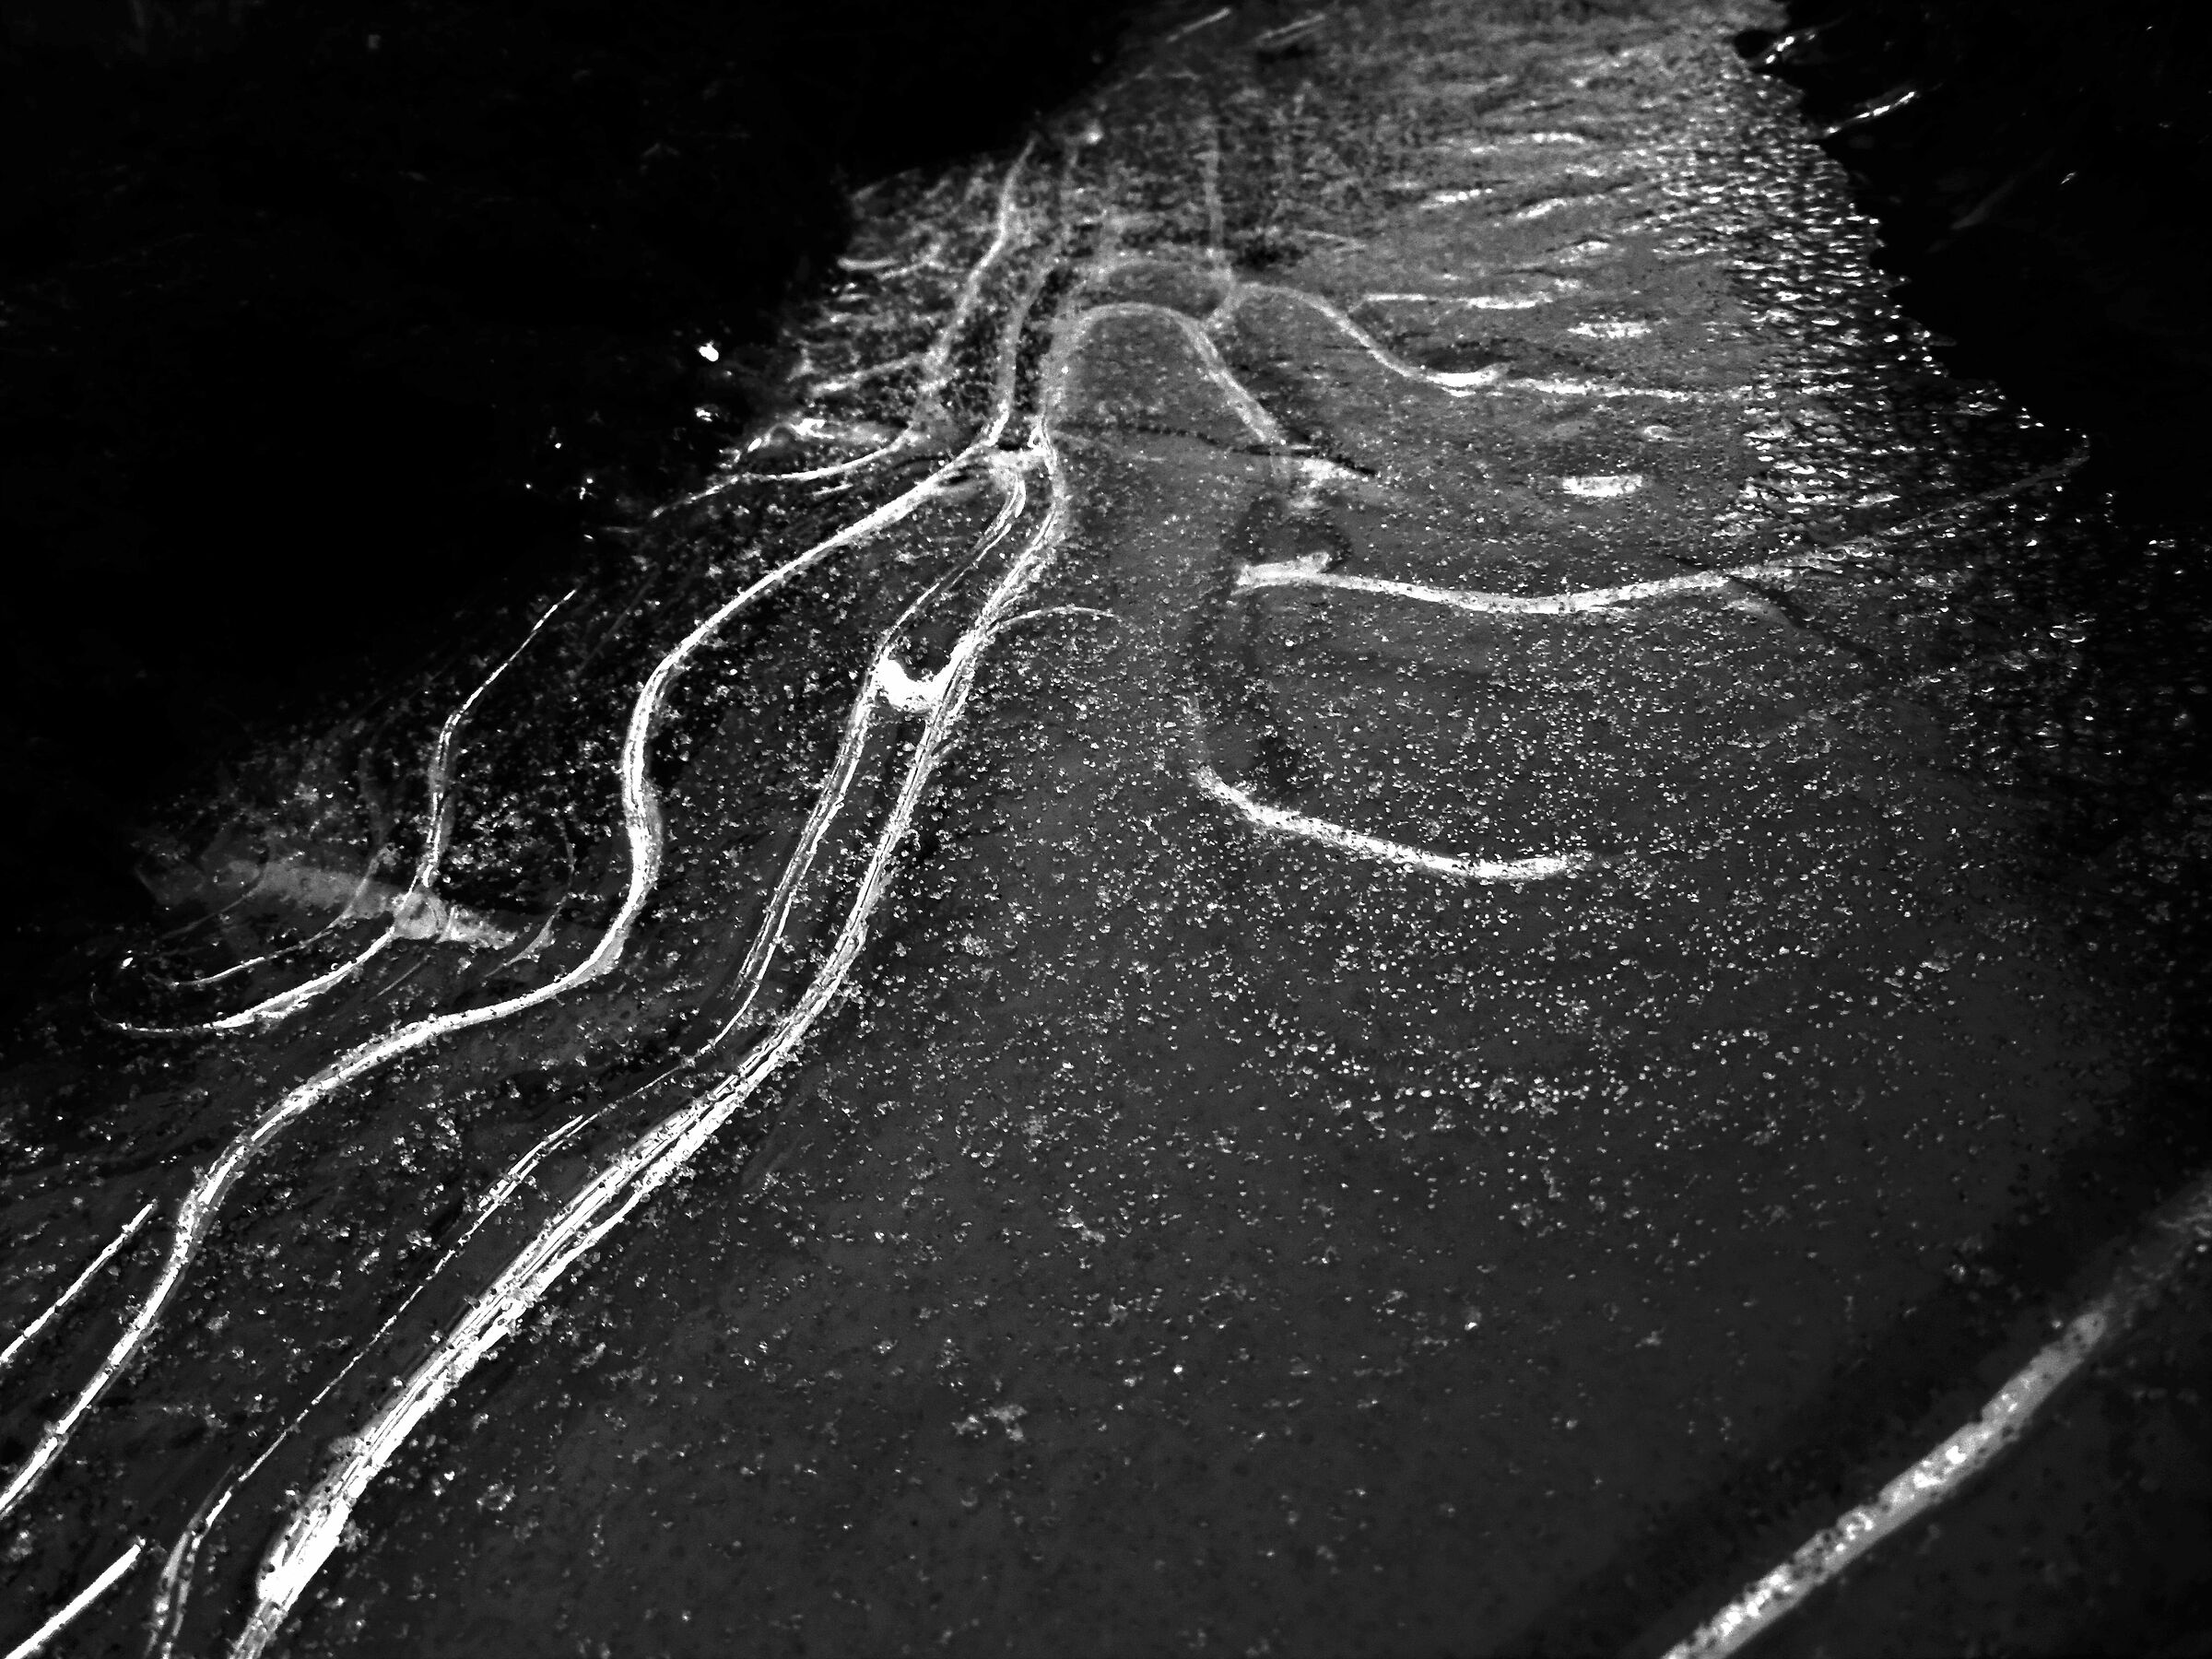 The veins of ice...